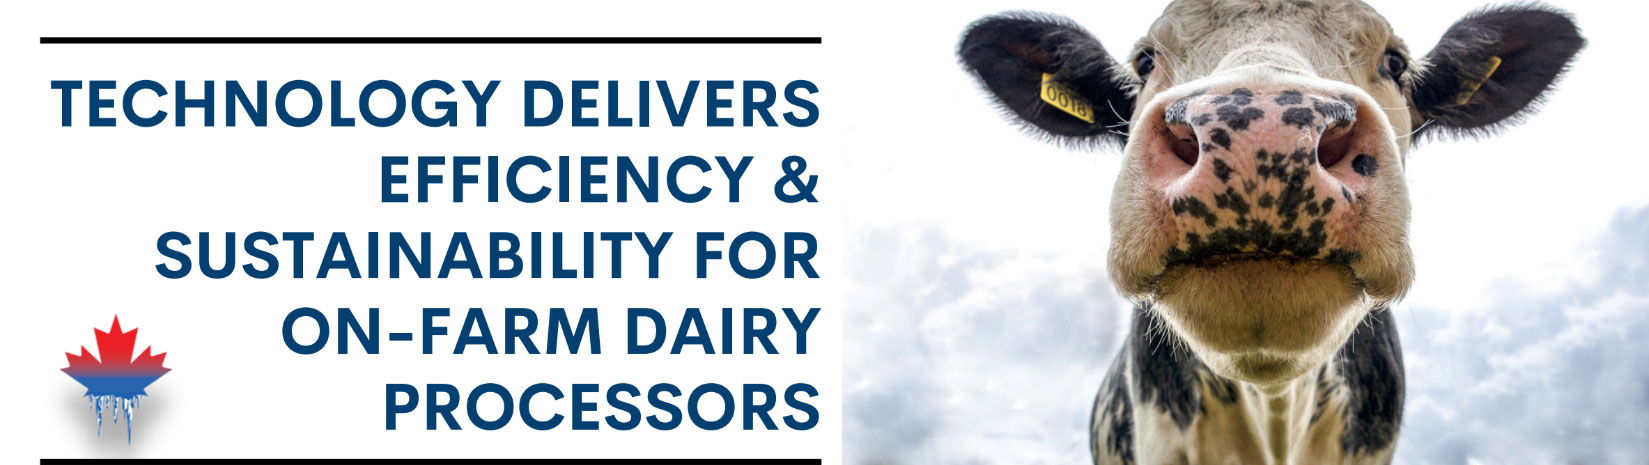 Technology Delivers Efficiency & Sustainability For On-Farm Dairy Processors